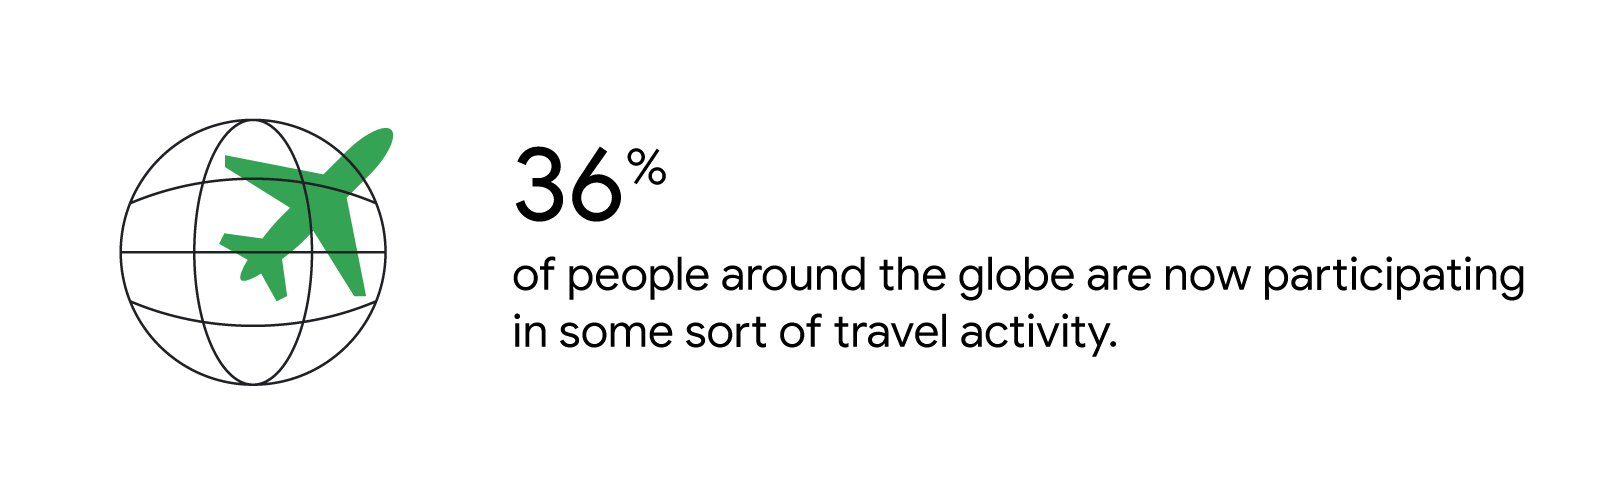 A plane flies around a globe. 36% of people around the globe are now participating in some sort of travel activity.